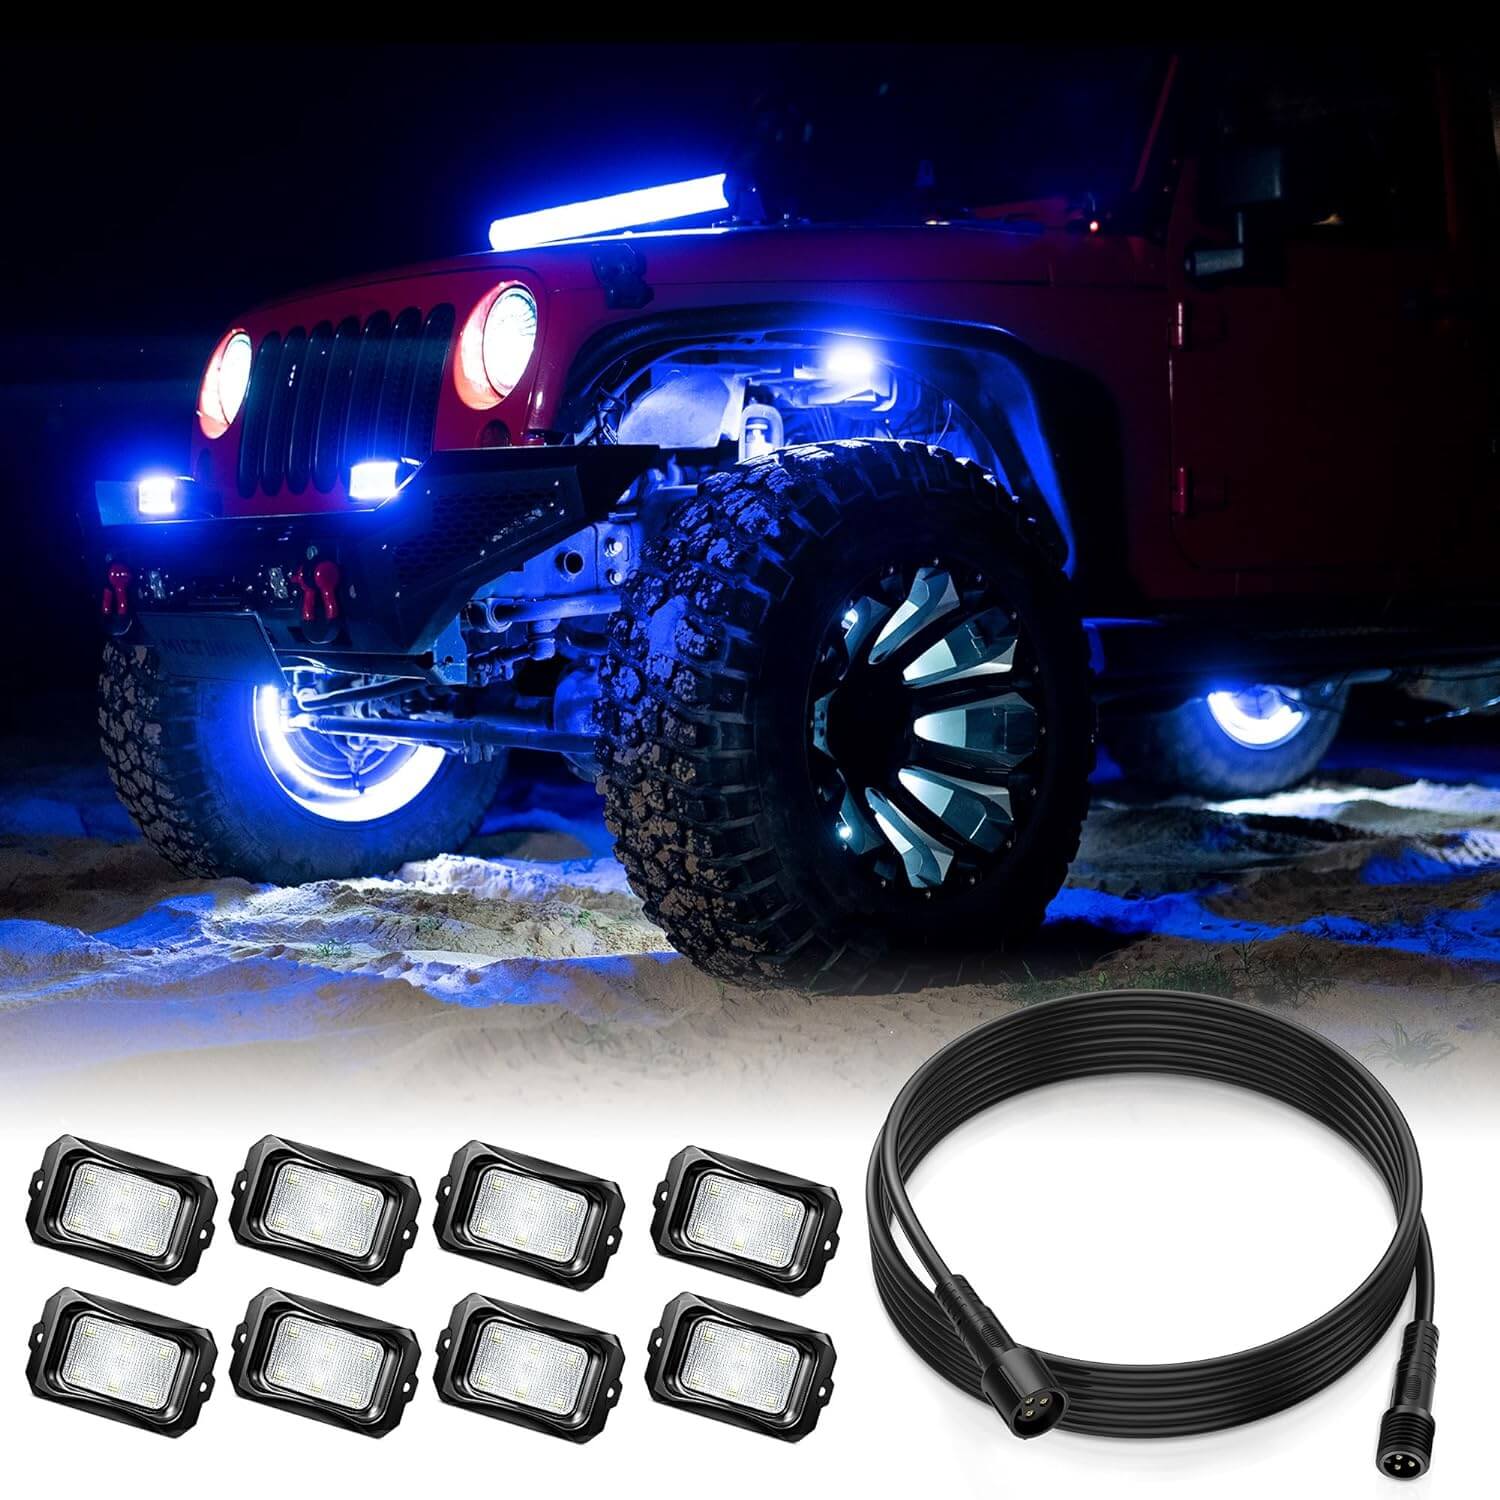 C2 RGB+IC LED Rock Lights Kit with 1pcs 6.56ft Extension Cable